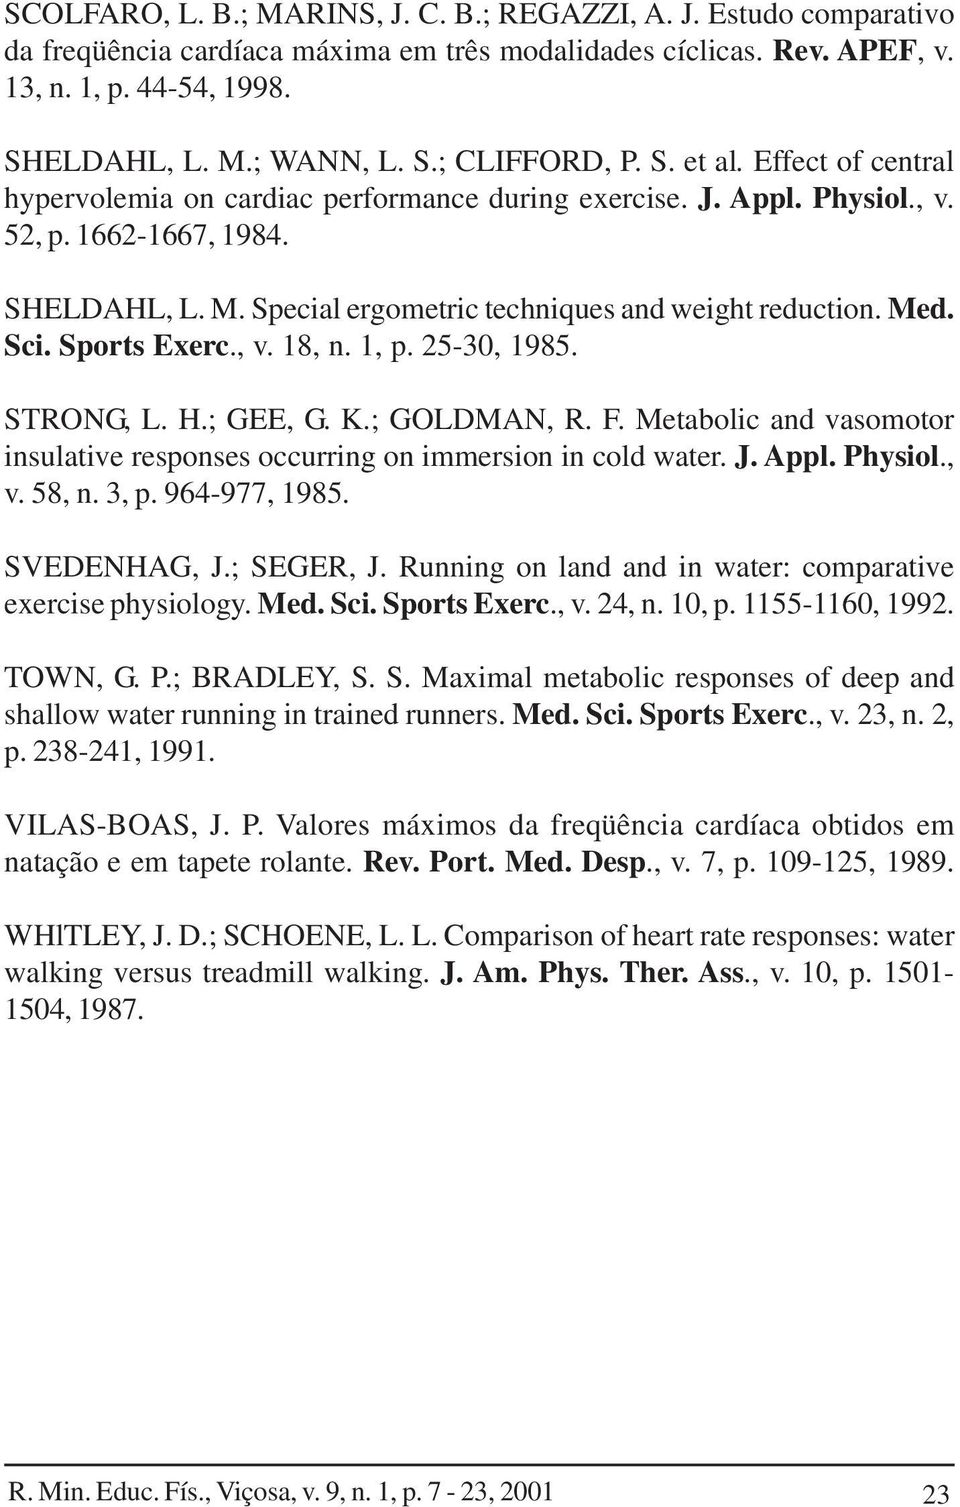 Sci. Sports Exerc., v. 18, n. 1, p. 25-30, 1985. STRONG, L. H.; GEE, G. K.; GOLDMAN, R. F. Metabolic and vasomotor insulative responses occurring on immersion in cold water. J. Appl. Physiol., v. 58, n.